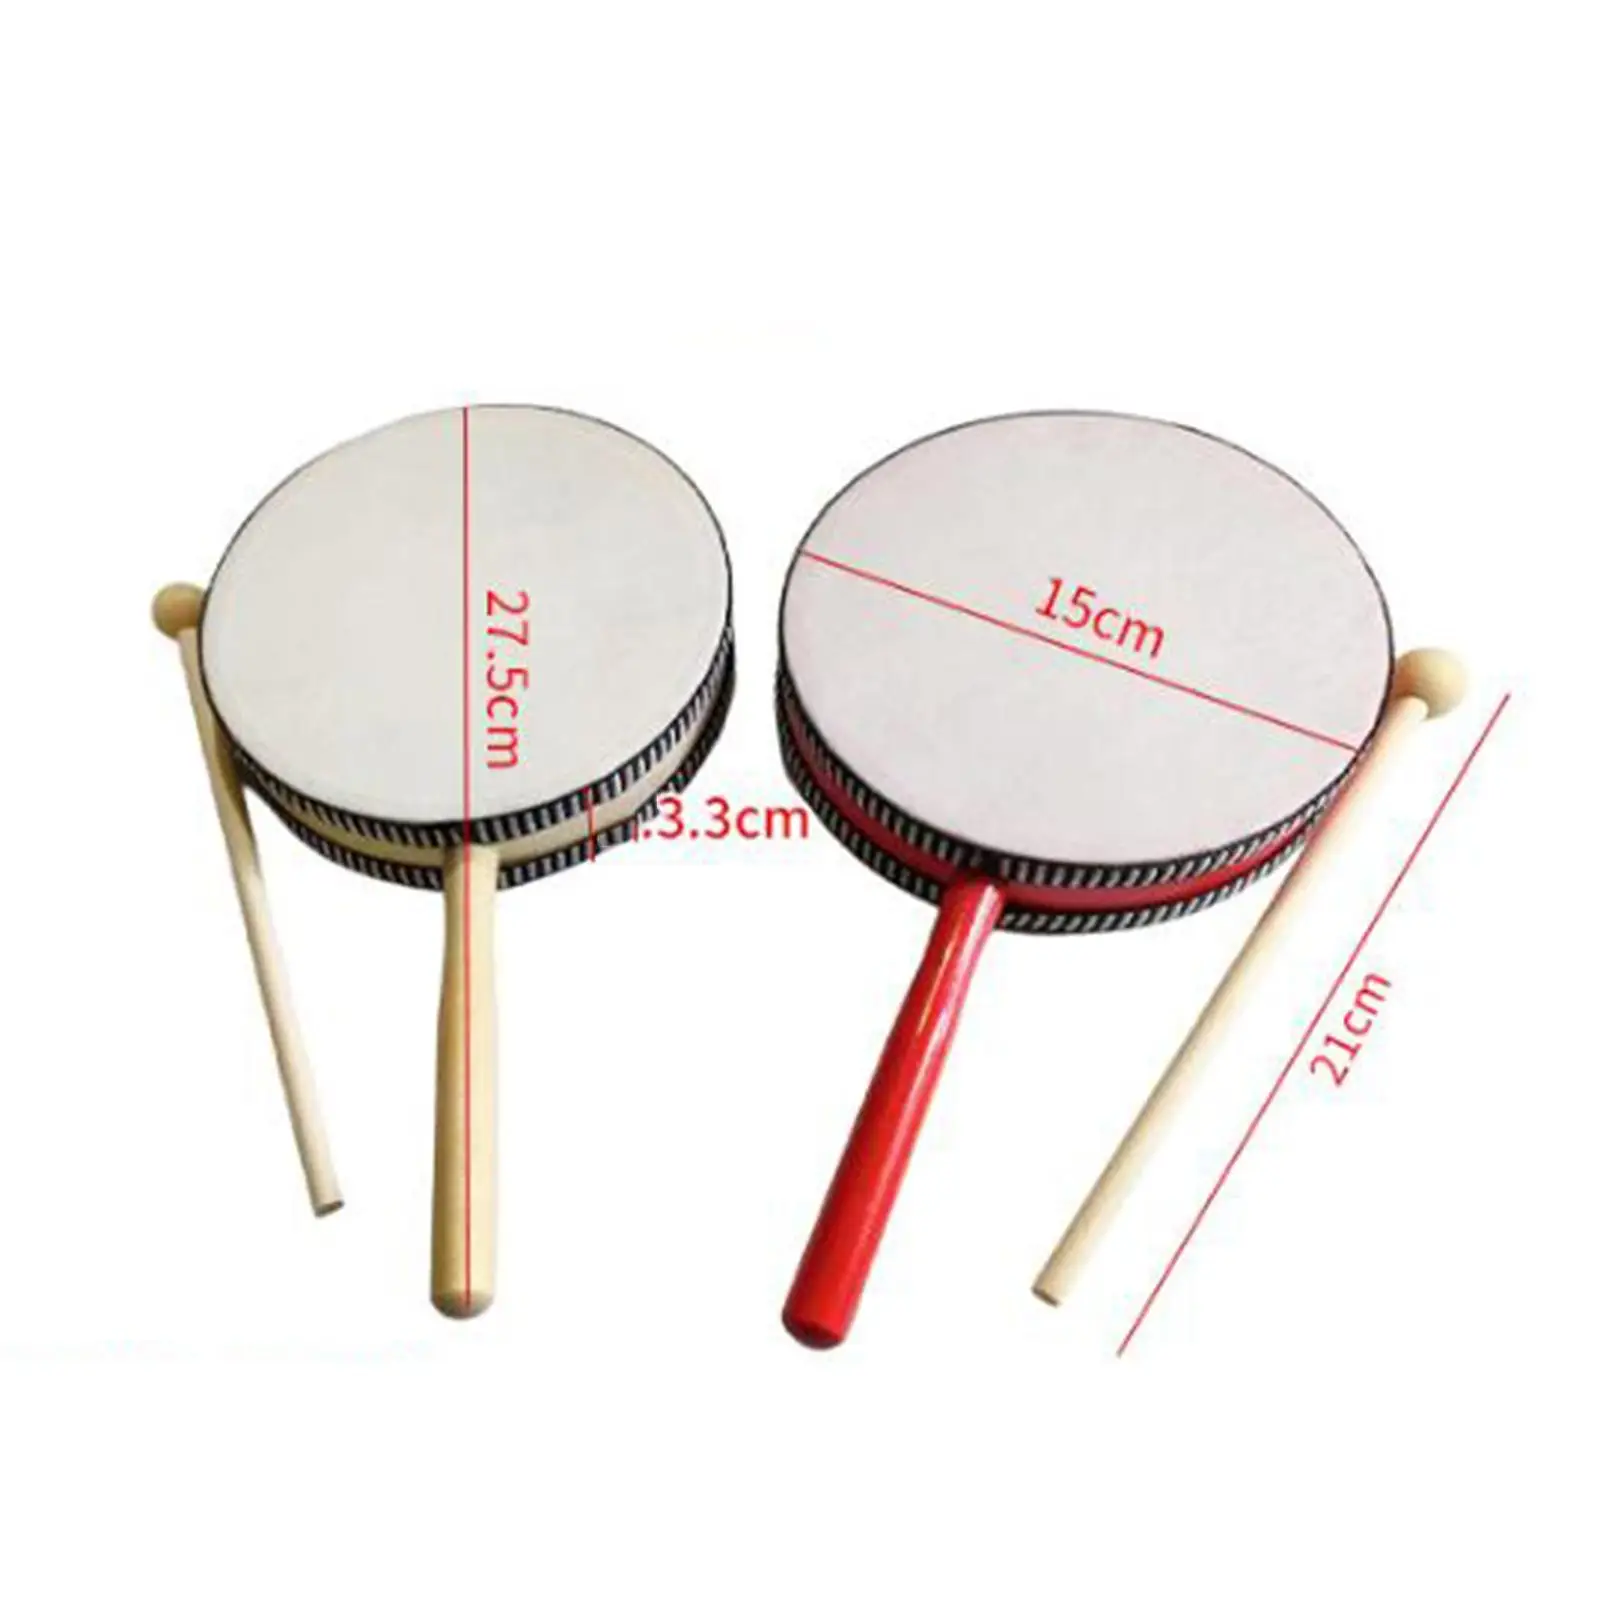 6 inch Kids Drum Percussion Instrument Toys for Home Drums Beginners